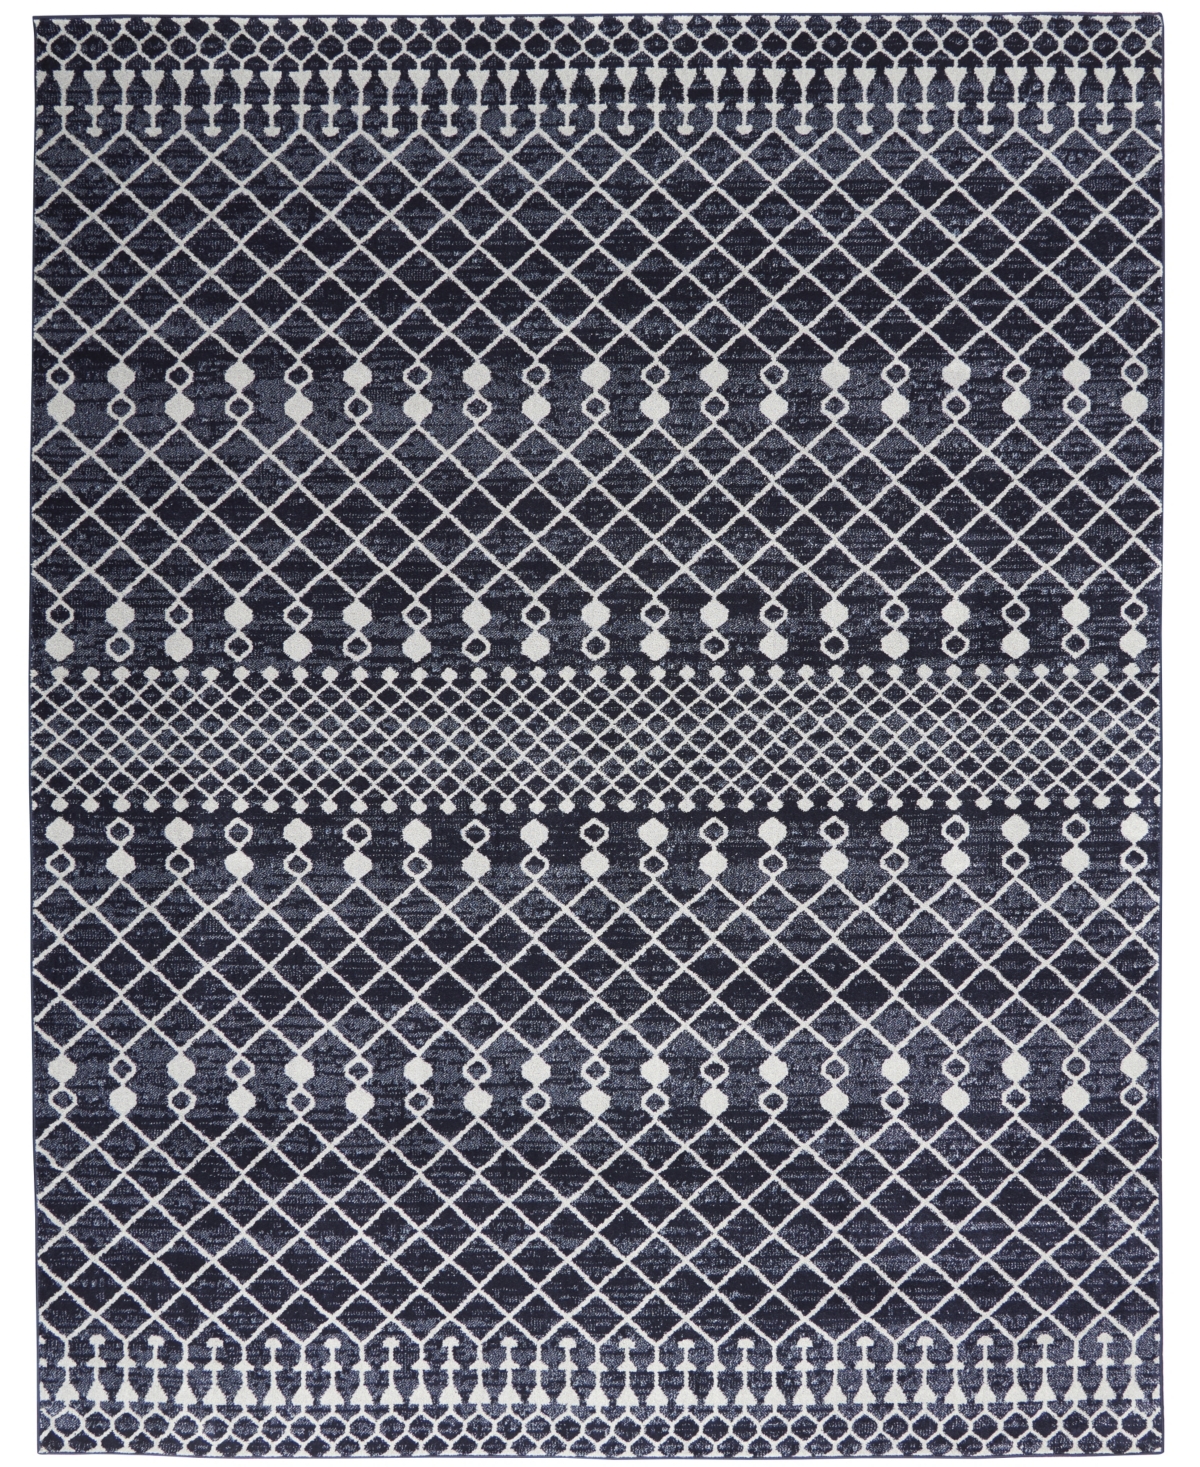 Nourison Home Palermo Pmr03 Navy And Gray 8' X 10' Area Rug In Navy,gray